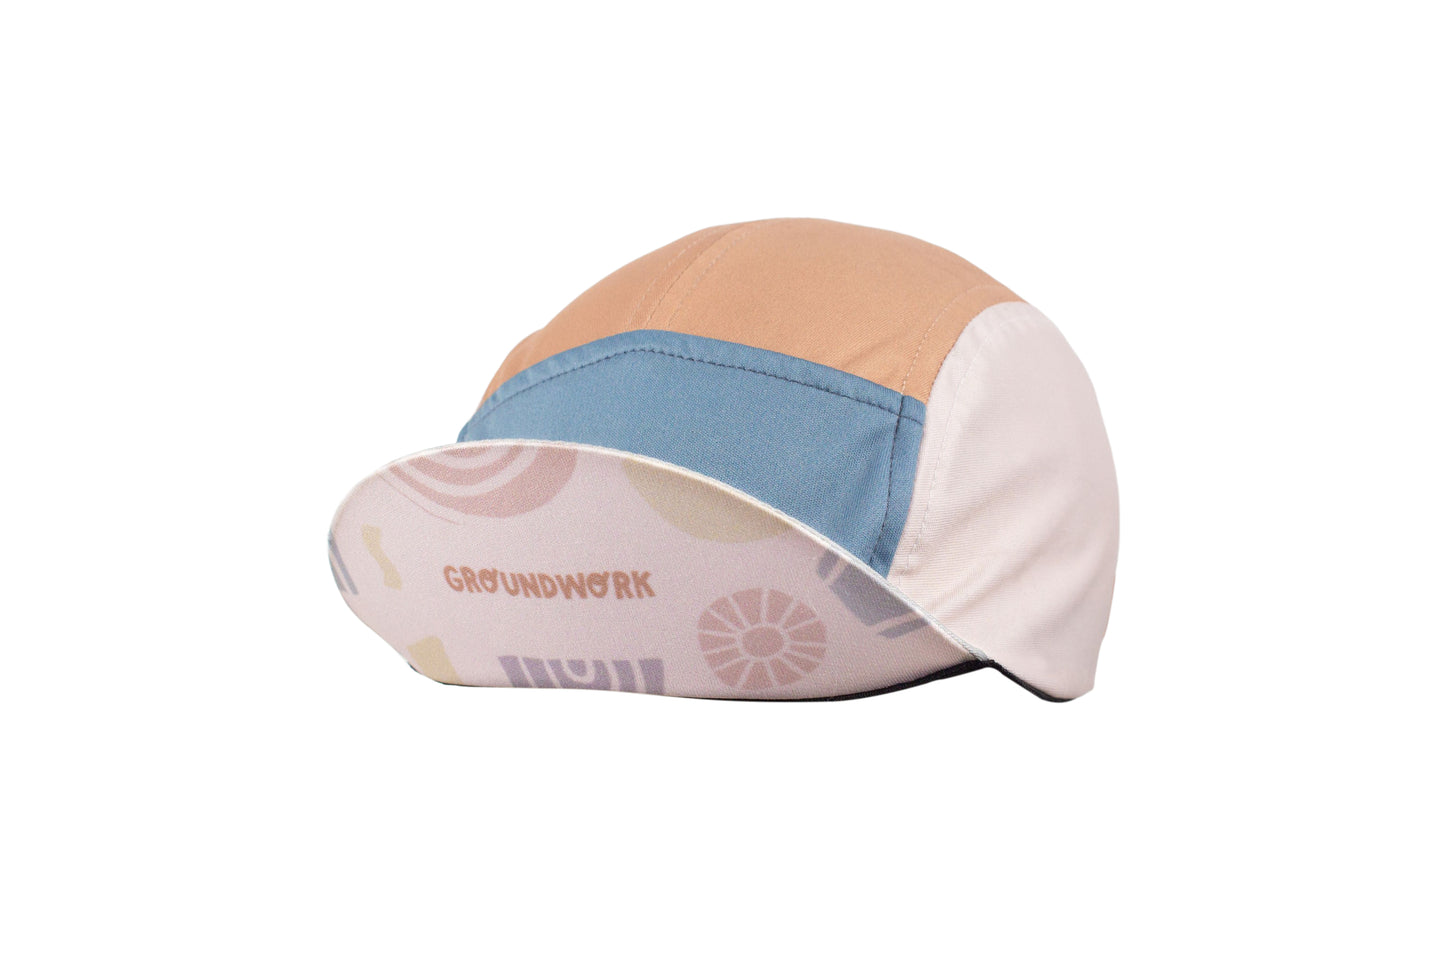 GWxMTH 5-Panel Cycling cap (Pale)